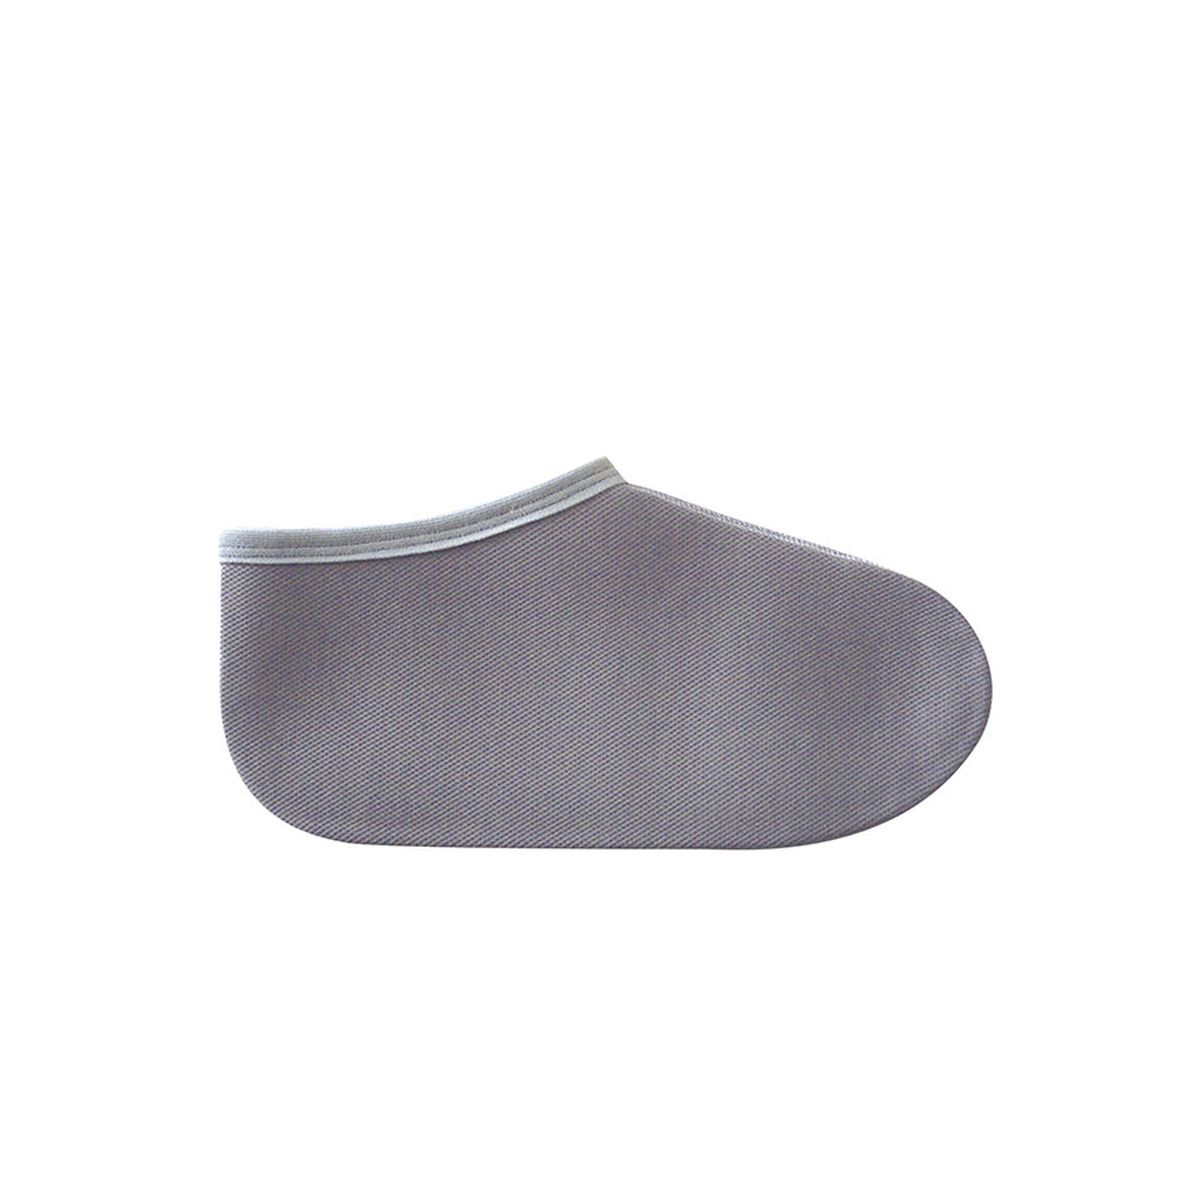 CHAUSSON JERSEY gris T40/41